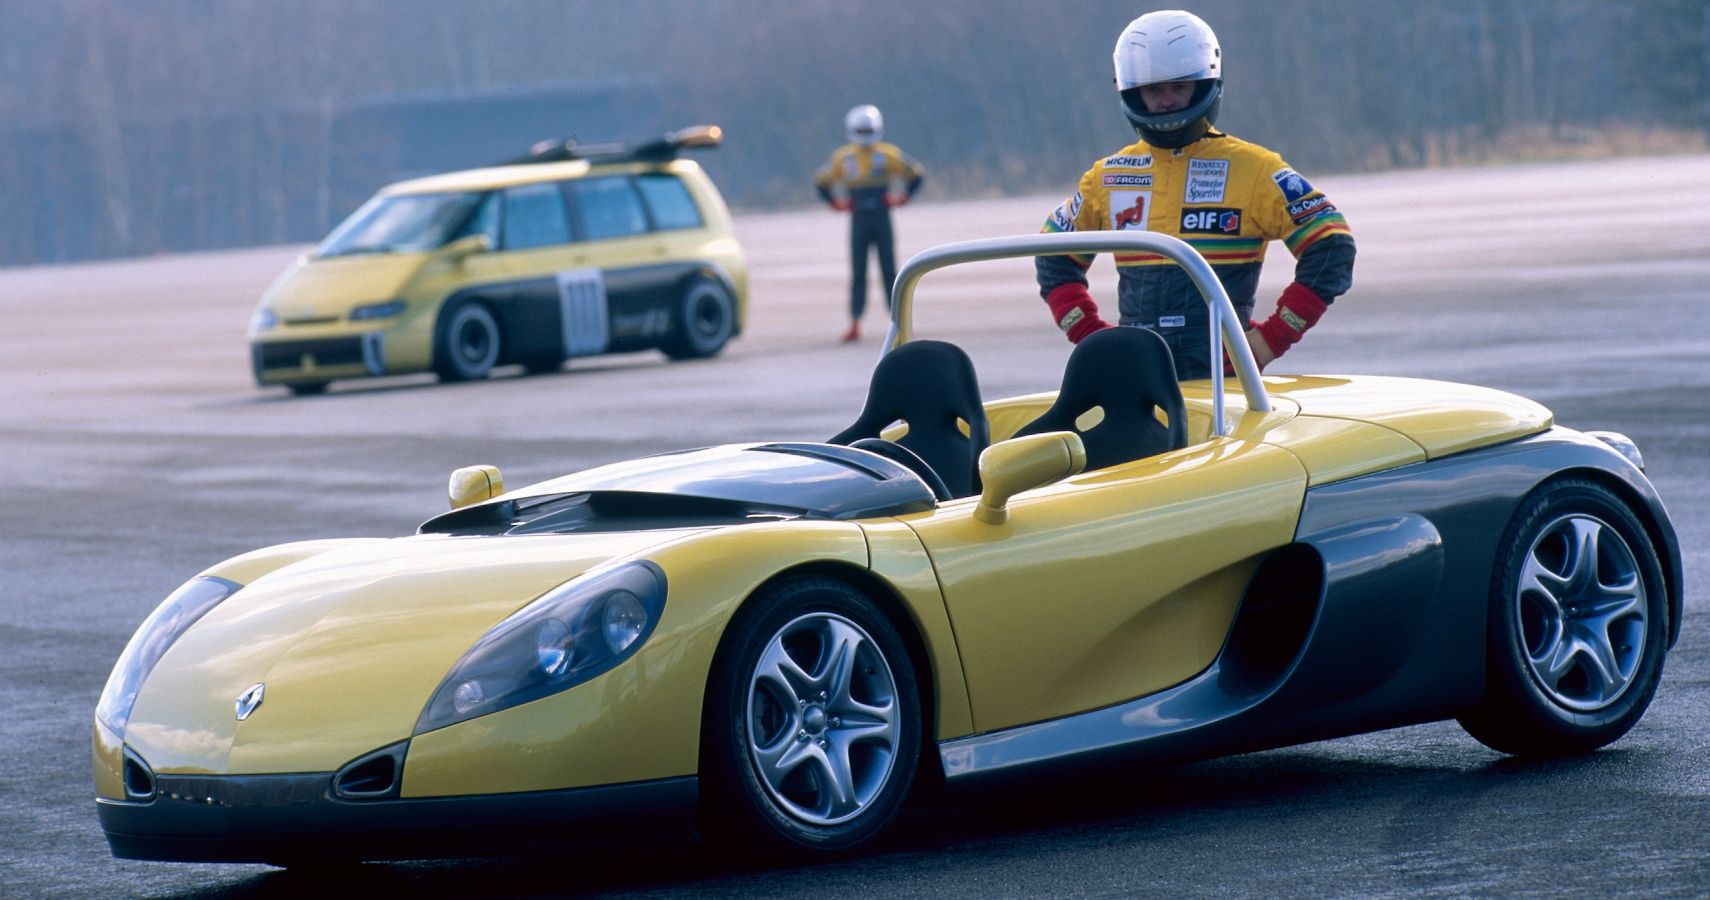 1995 Renault Sport Spider and Renault Espace F1